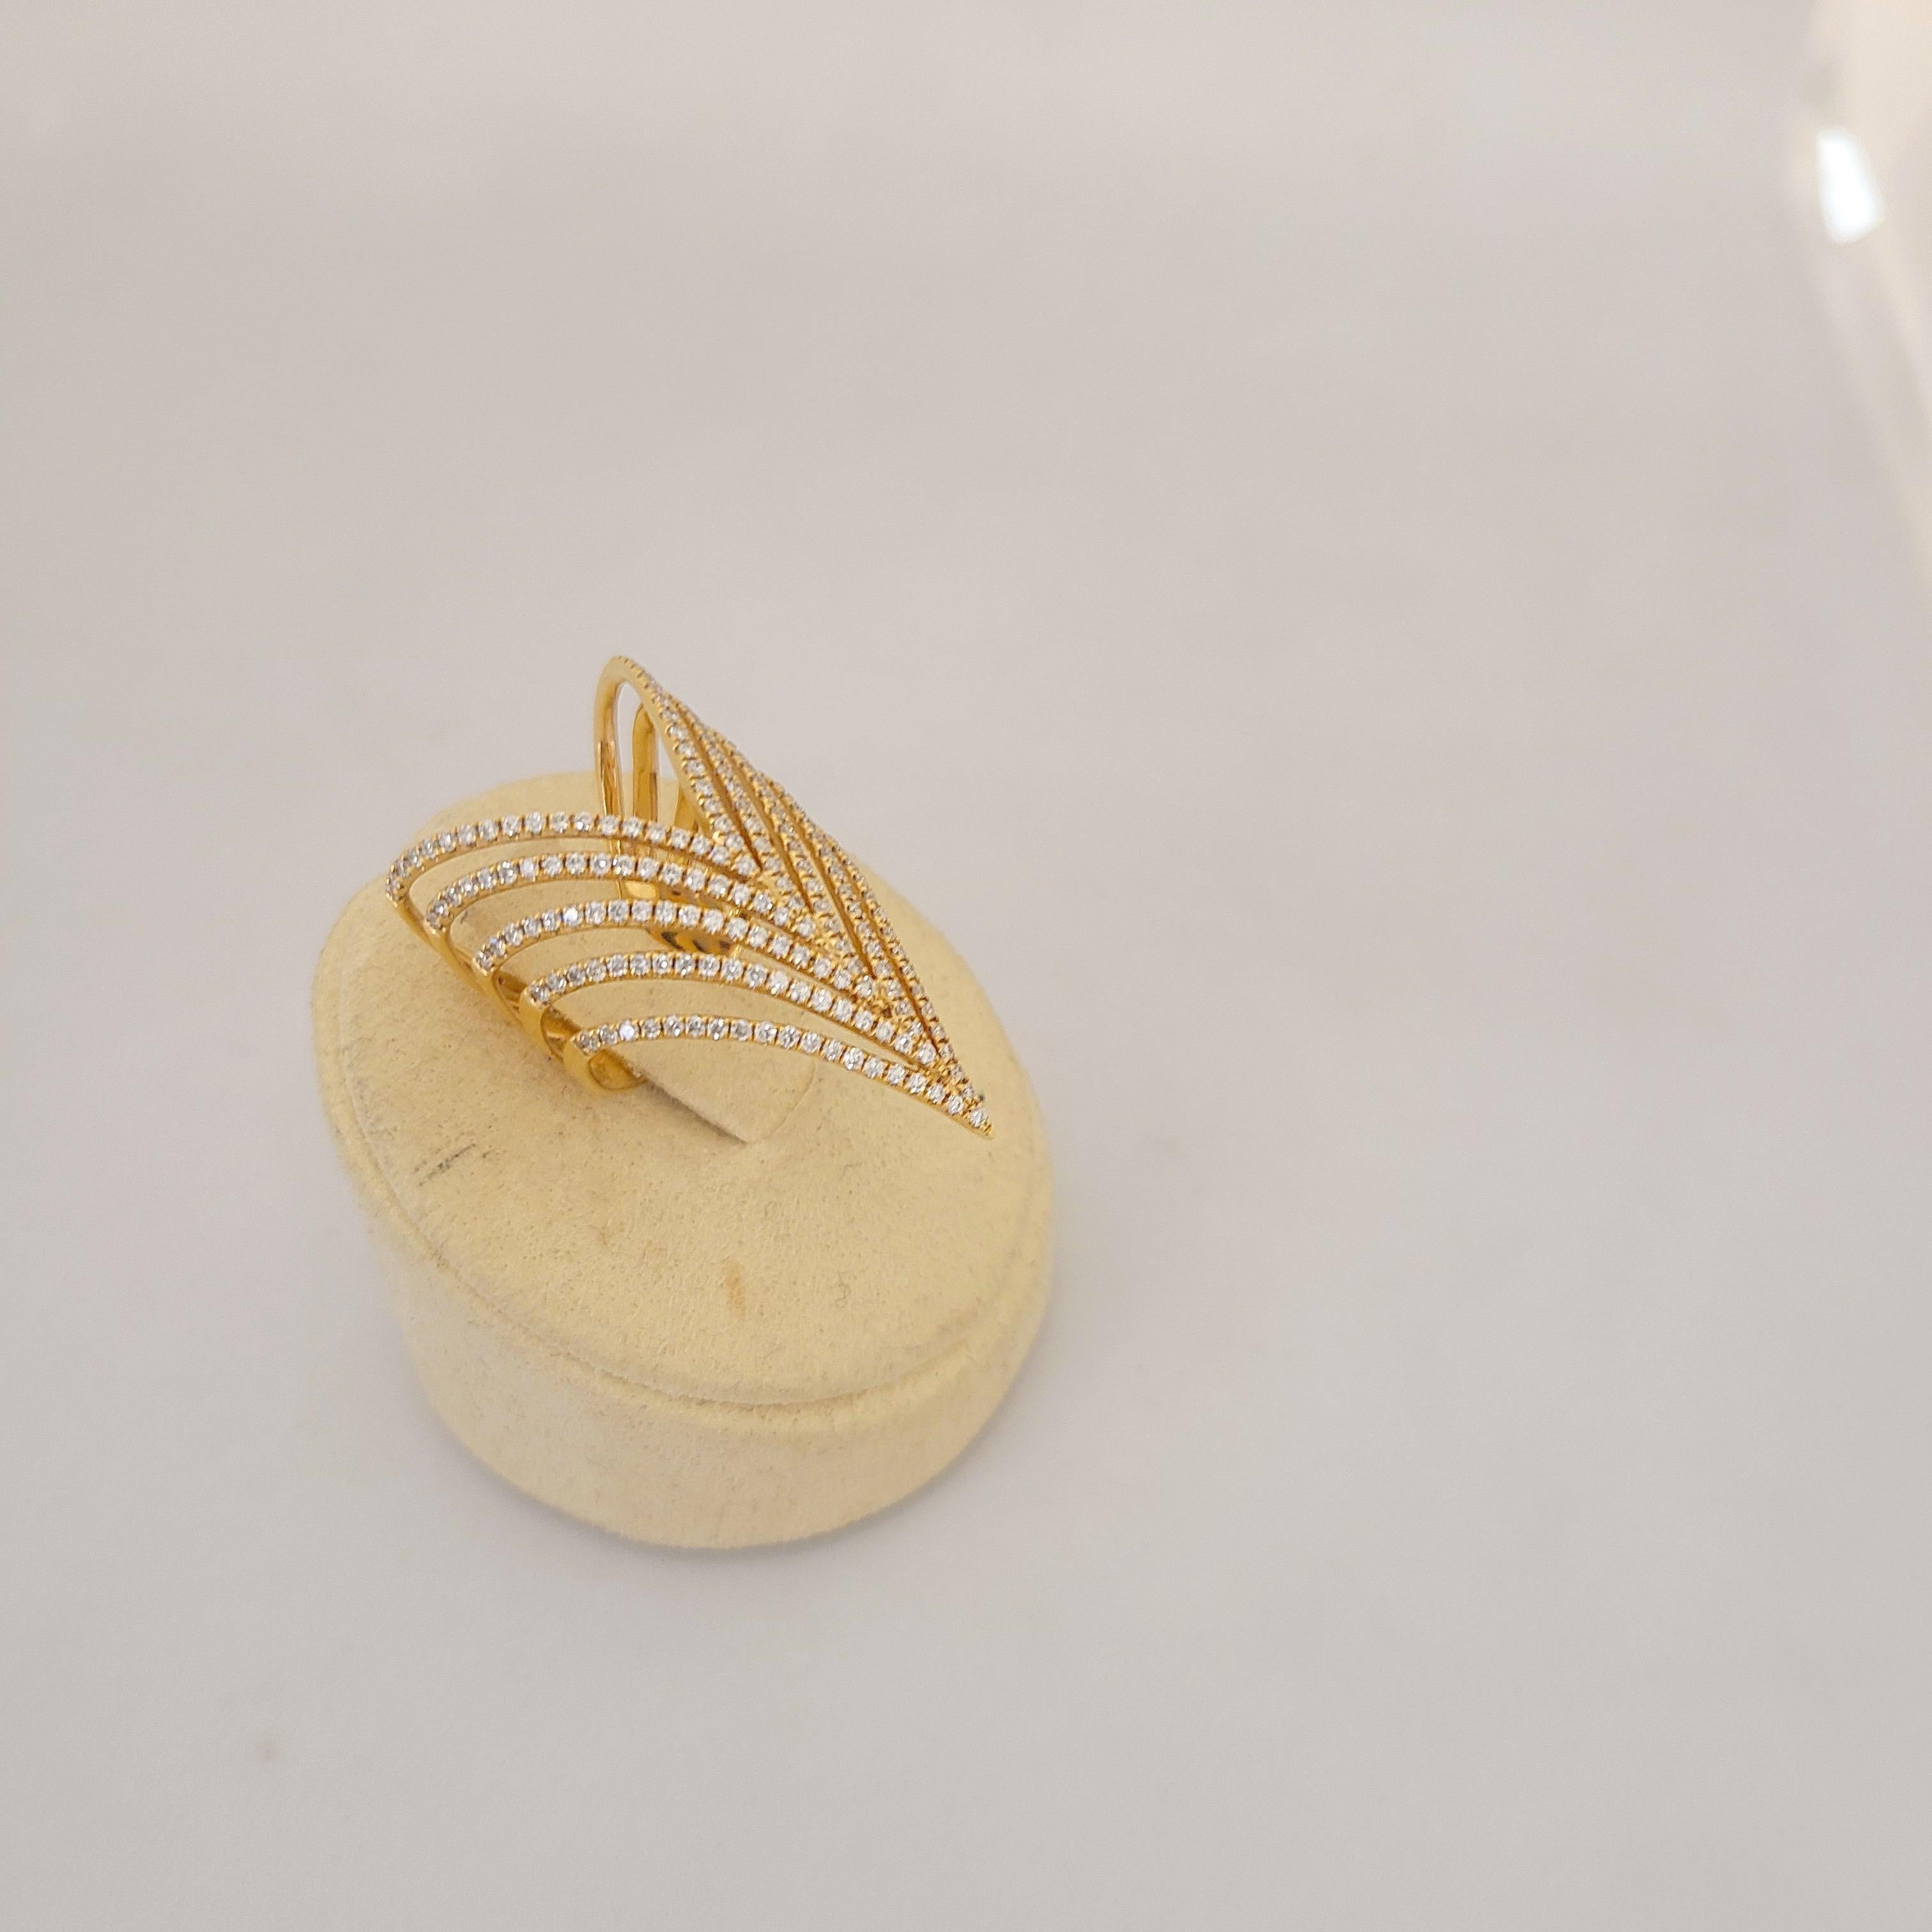 18-karat rose gold ring with brilliant-cut diamonds in a delicate chevron pattern.
Round brilliant diamonds total 0.92 carats.
Ring Size 6

Djula Jewelry is made in France.